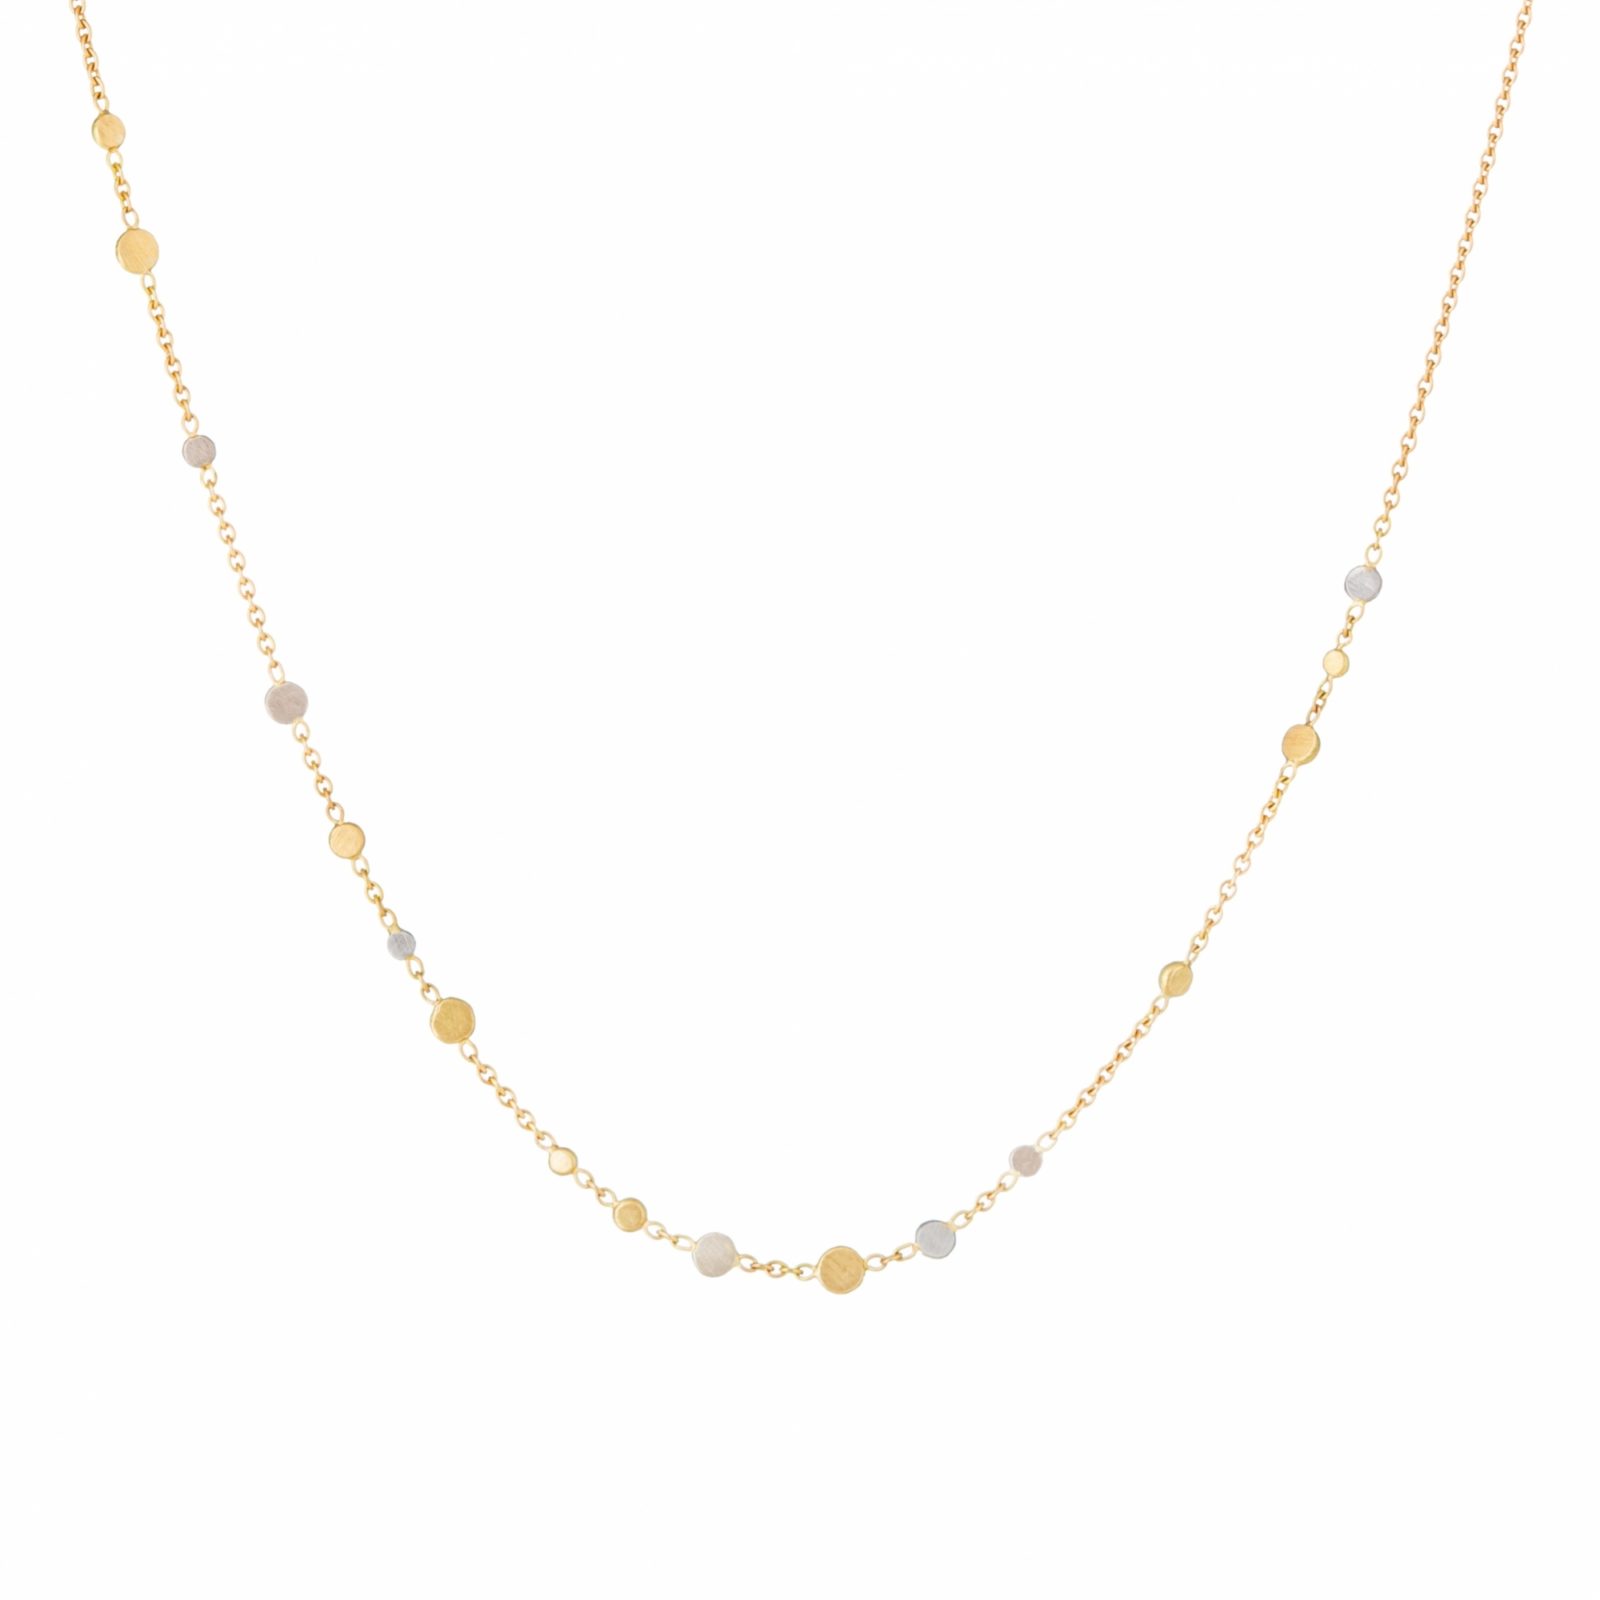 Sia Taylor SN2 YWP Scattered Dust Gold Platinum Necklace WB